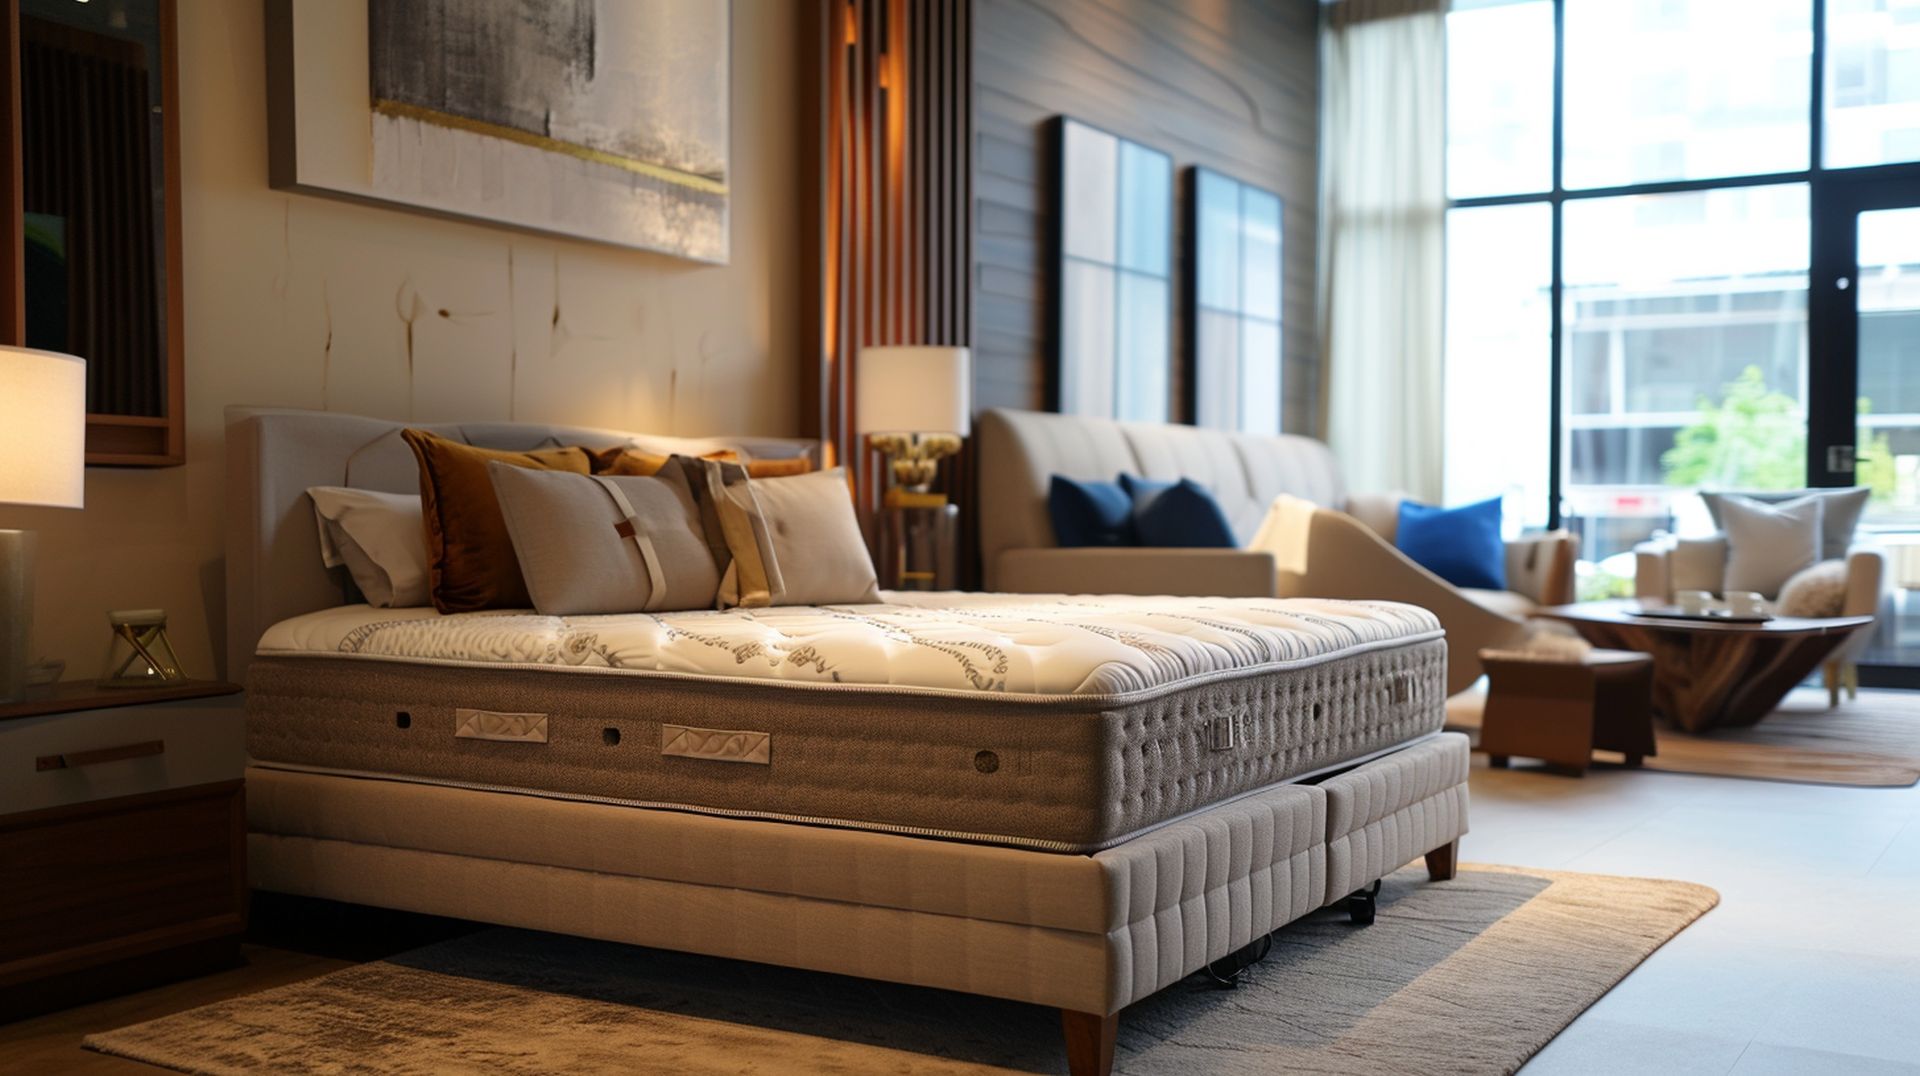 If you're looking for a new bed, mattress stores in Rancho Cucamonga offer the best customer and delivery service, financing, and warranties in California